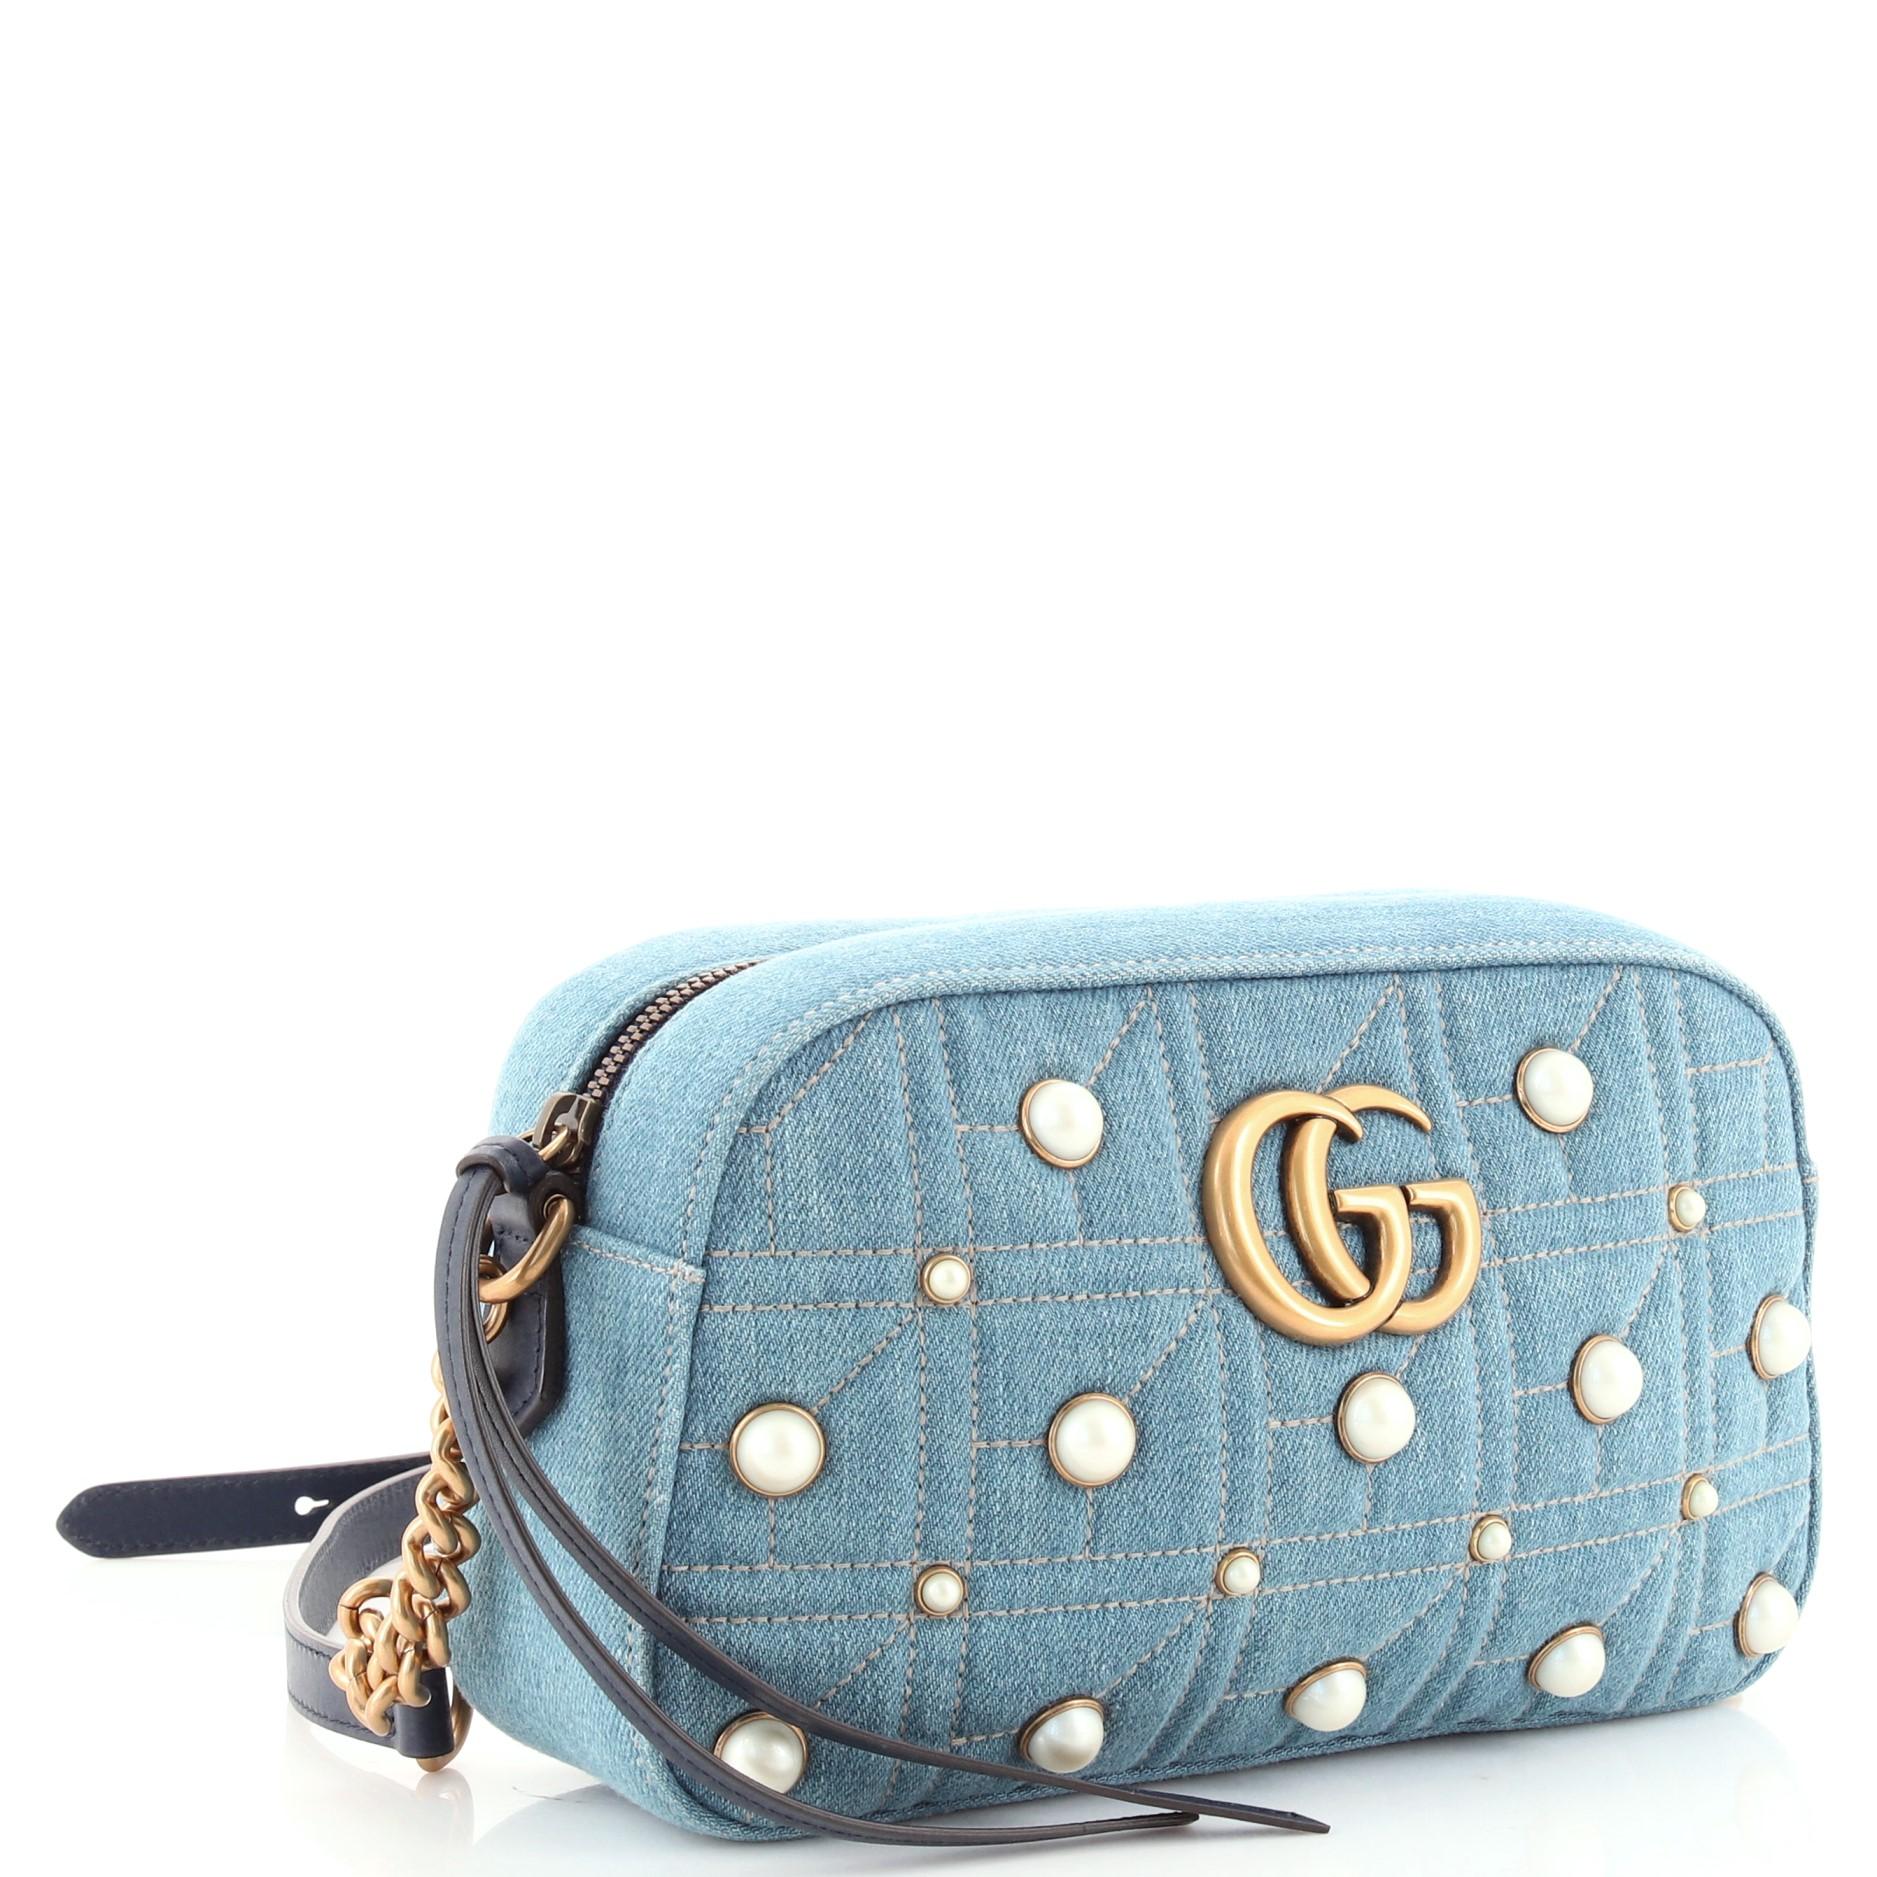 Gray Gucci Pearly GG Marmont Shoulder Bag Embellished Matelasse Denim Small